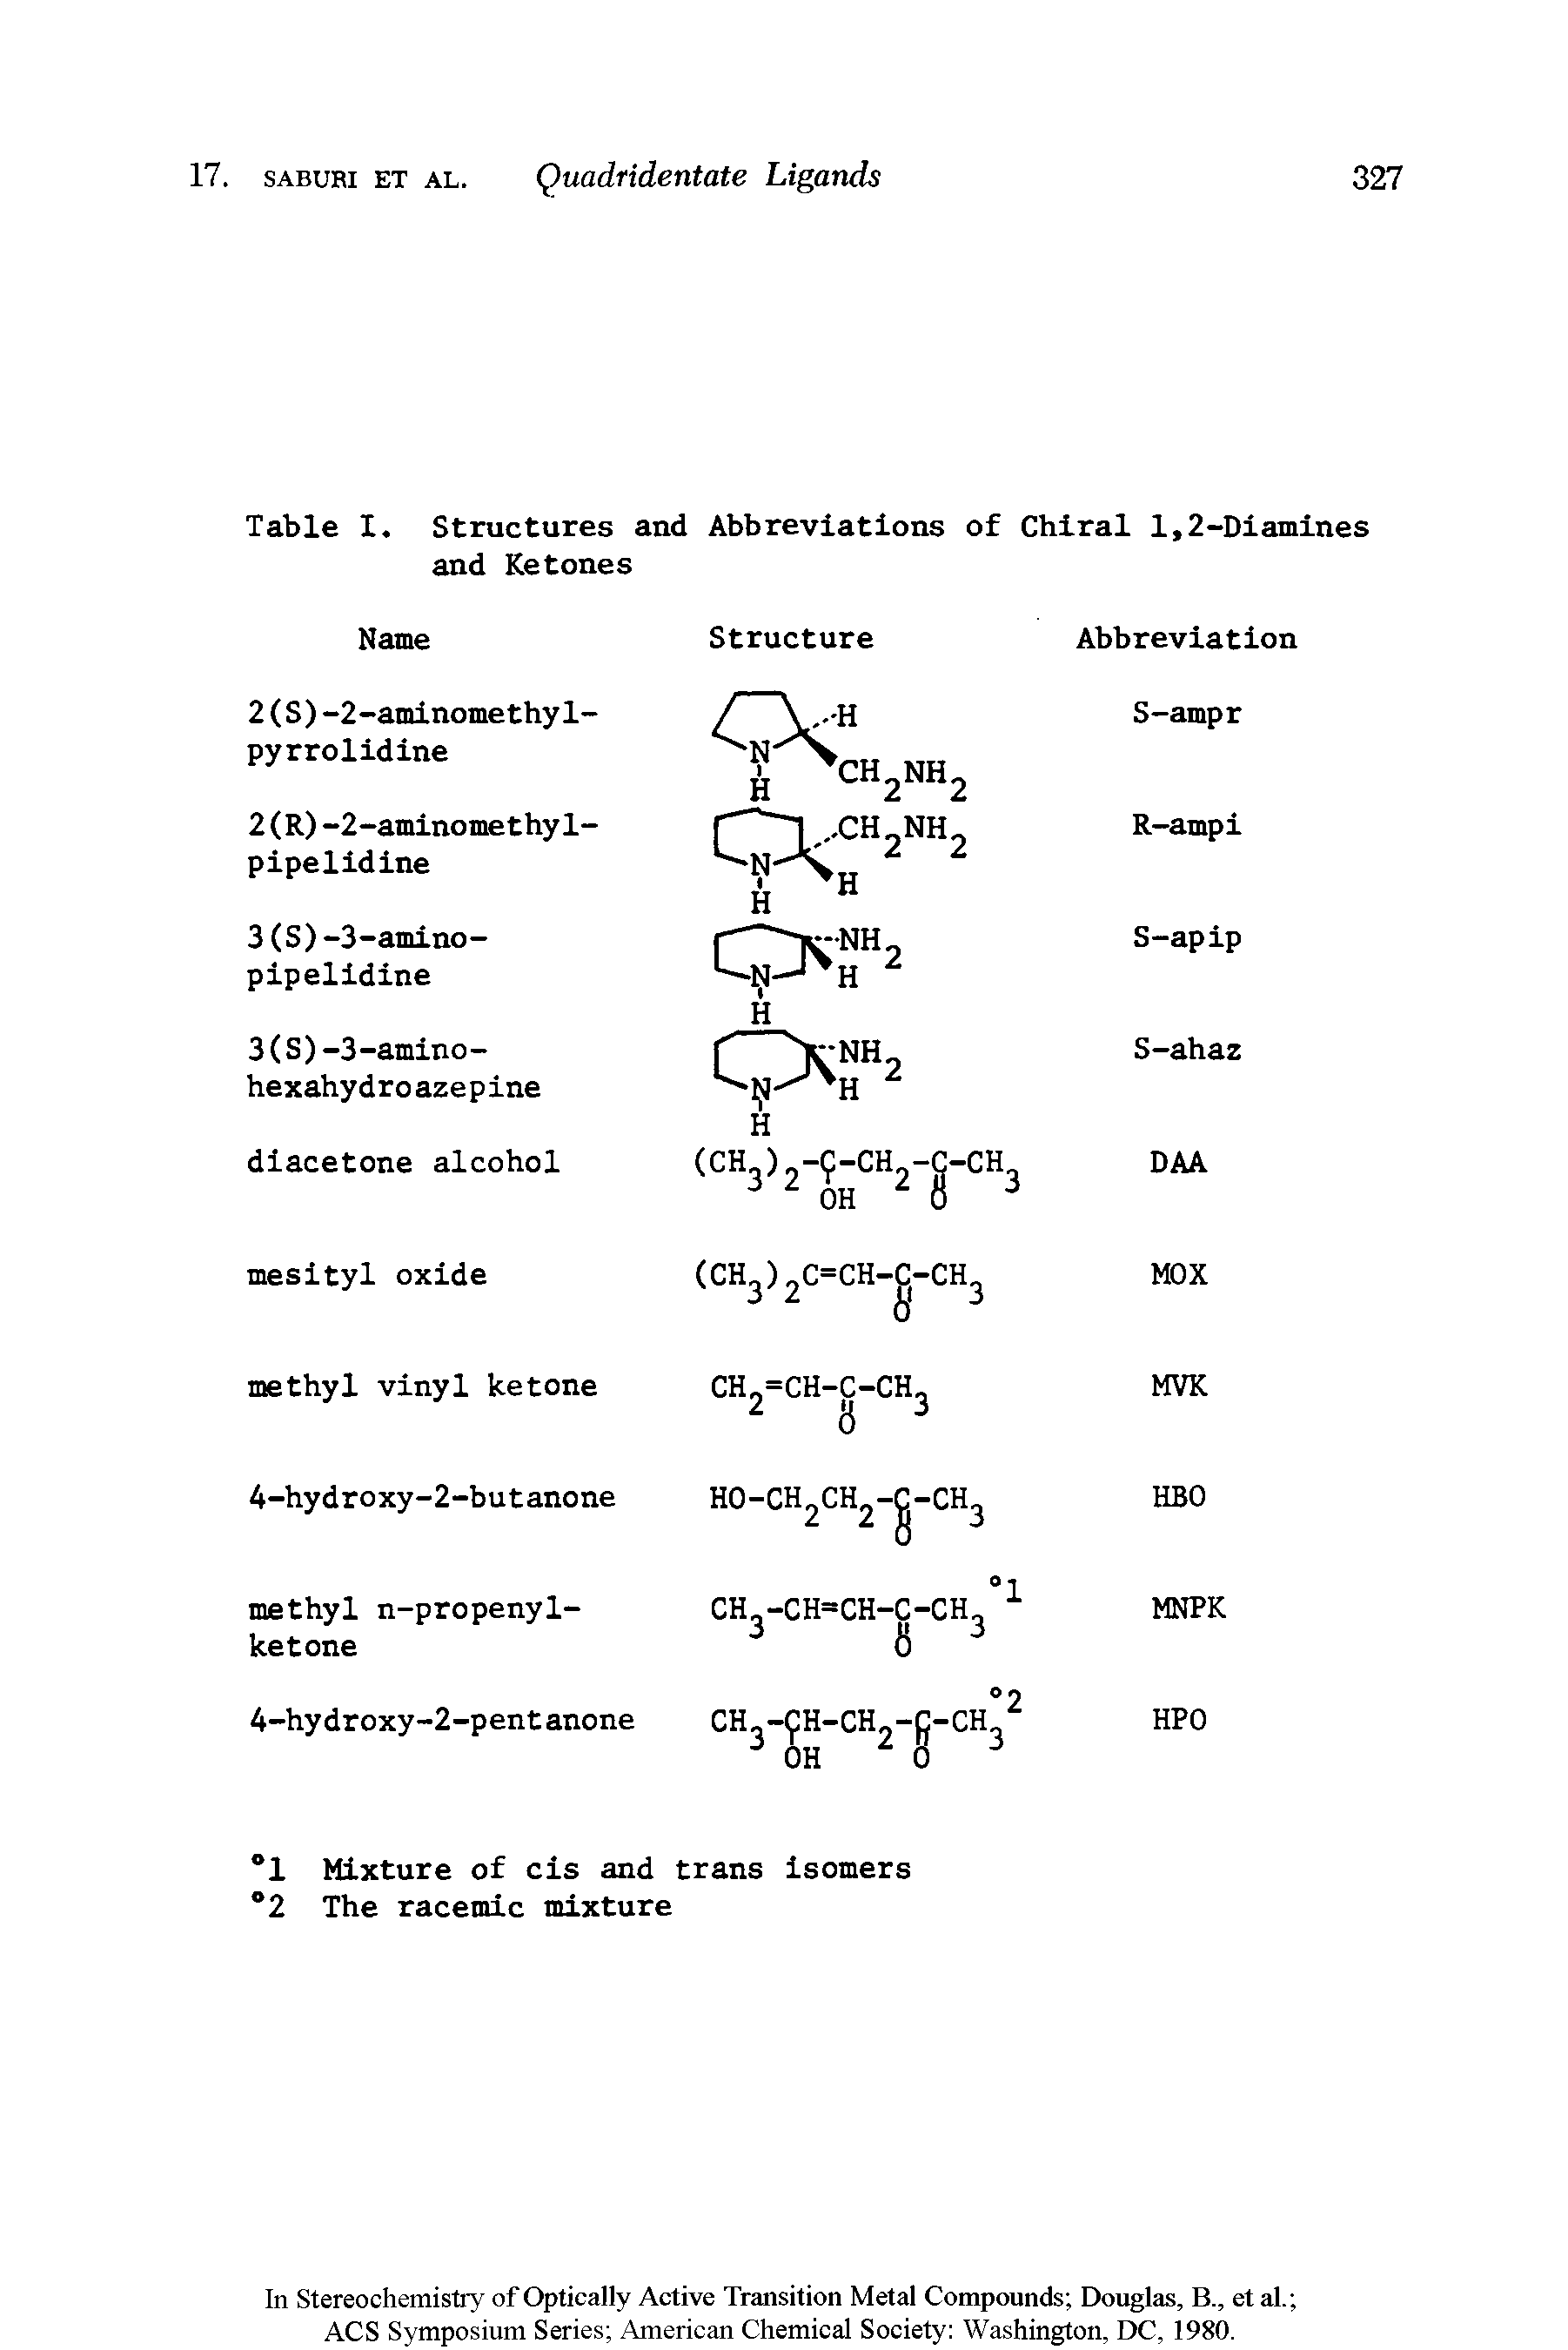 Table I. Structures and Abbreviations of Chiral 1,2-Diamines and Ketones...